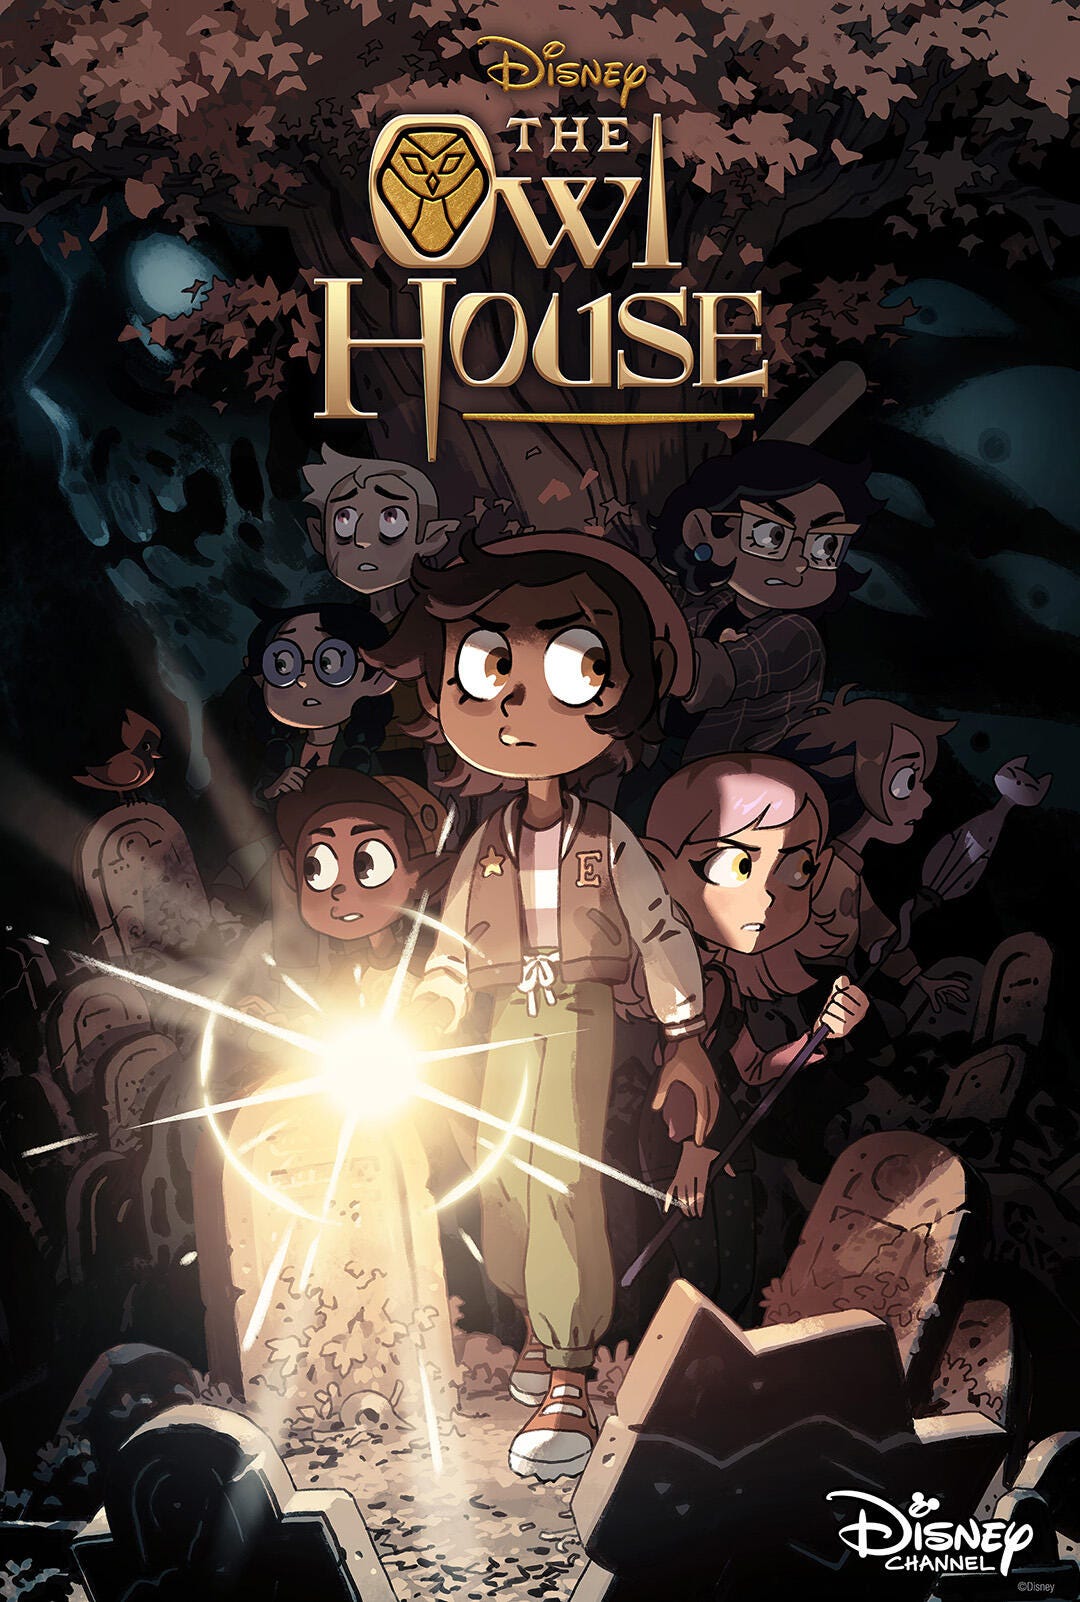 Key art for "Thanks to Them," the first of three finale specials for Disney's The Owl House